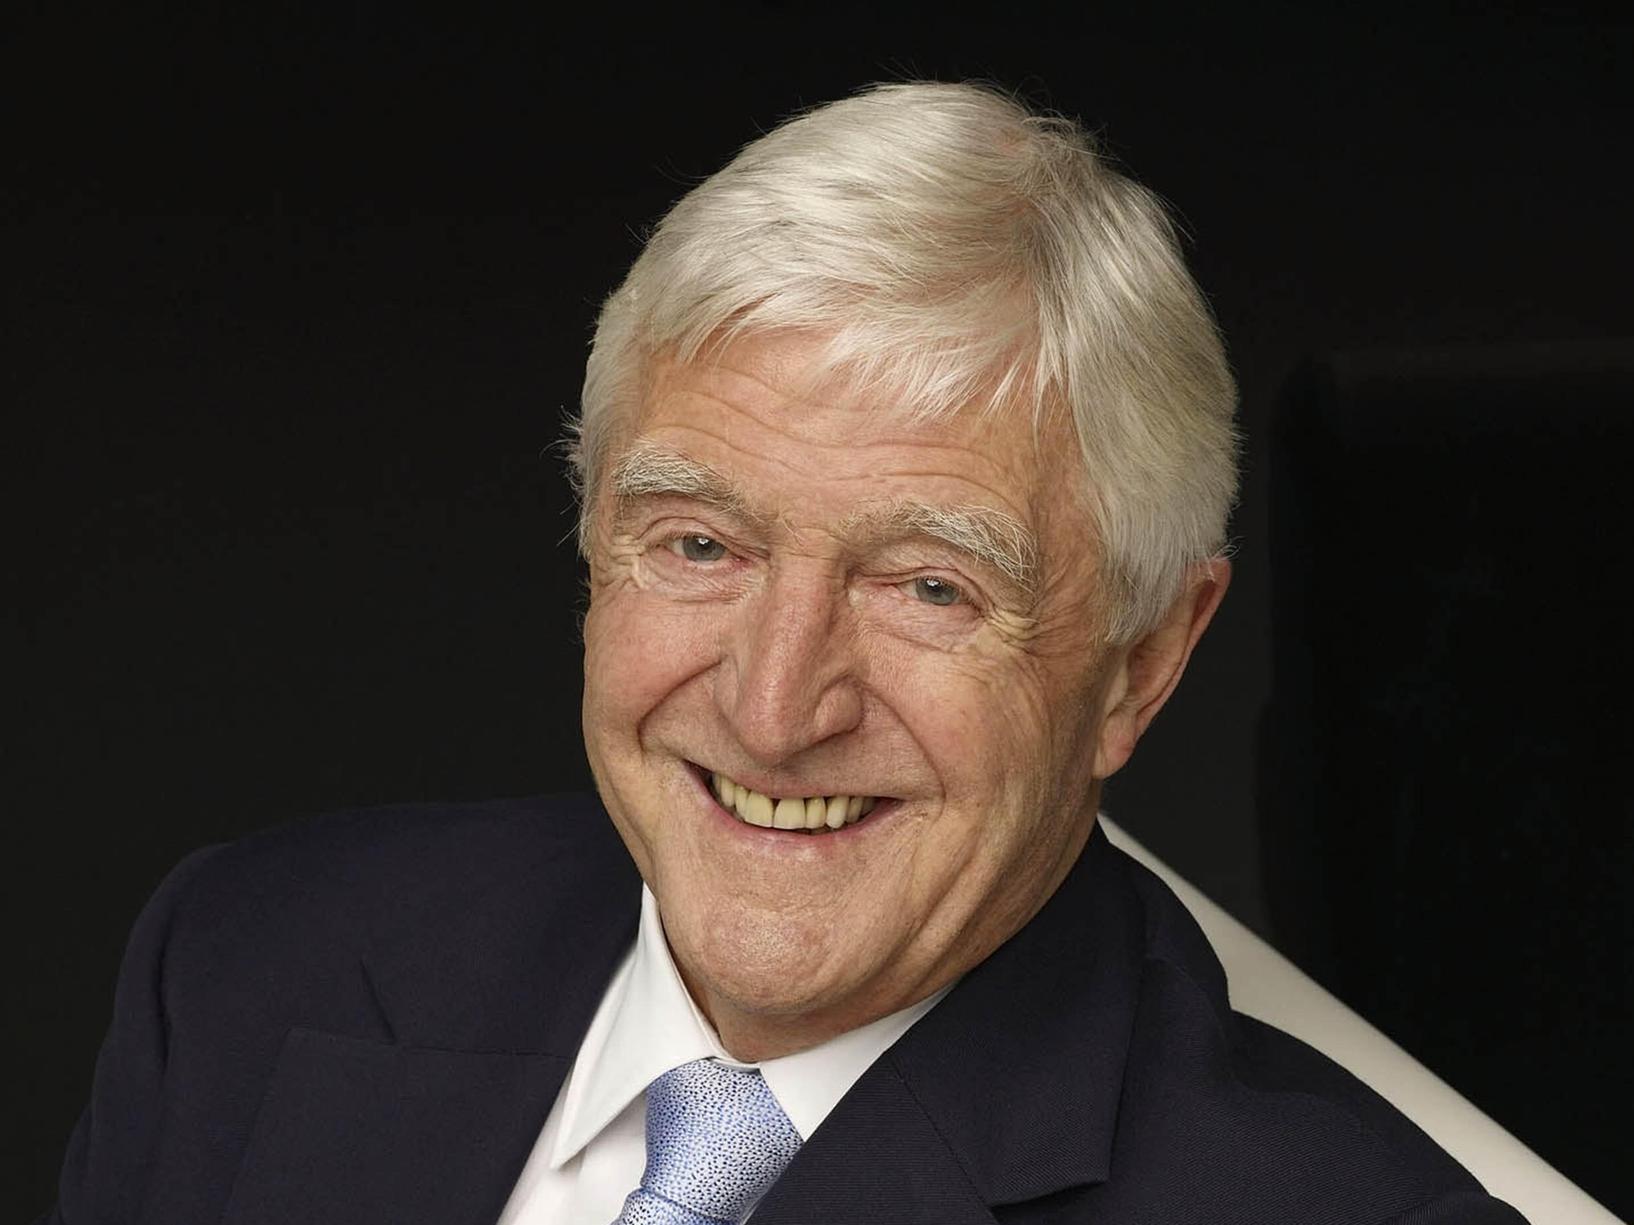 Sir Michael Parkinson will be sharing amazing stories of his life and career at the Victoria Theatre, Halifax on February 13 at 7.30pm. In conversation with his son Mike the show will show highlights from the Parkinson archive.